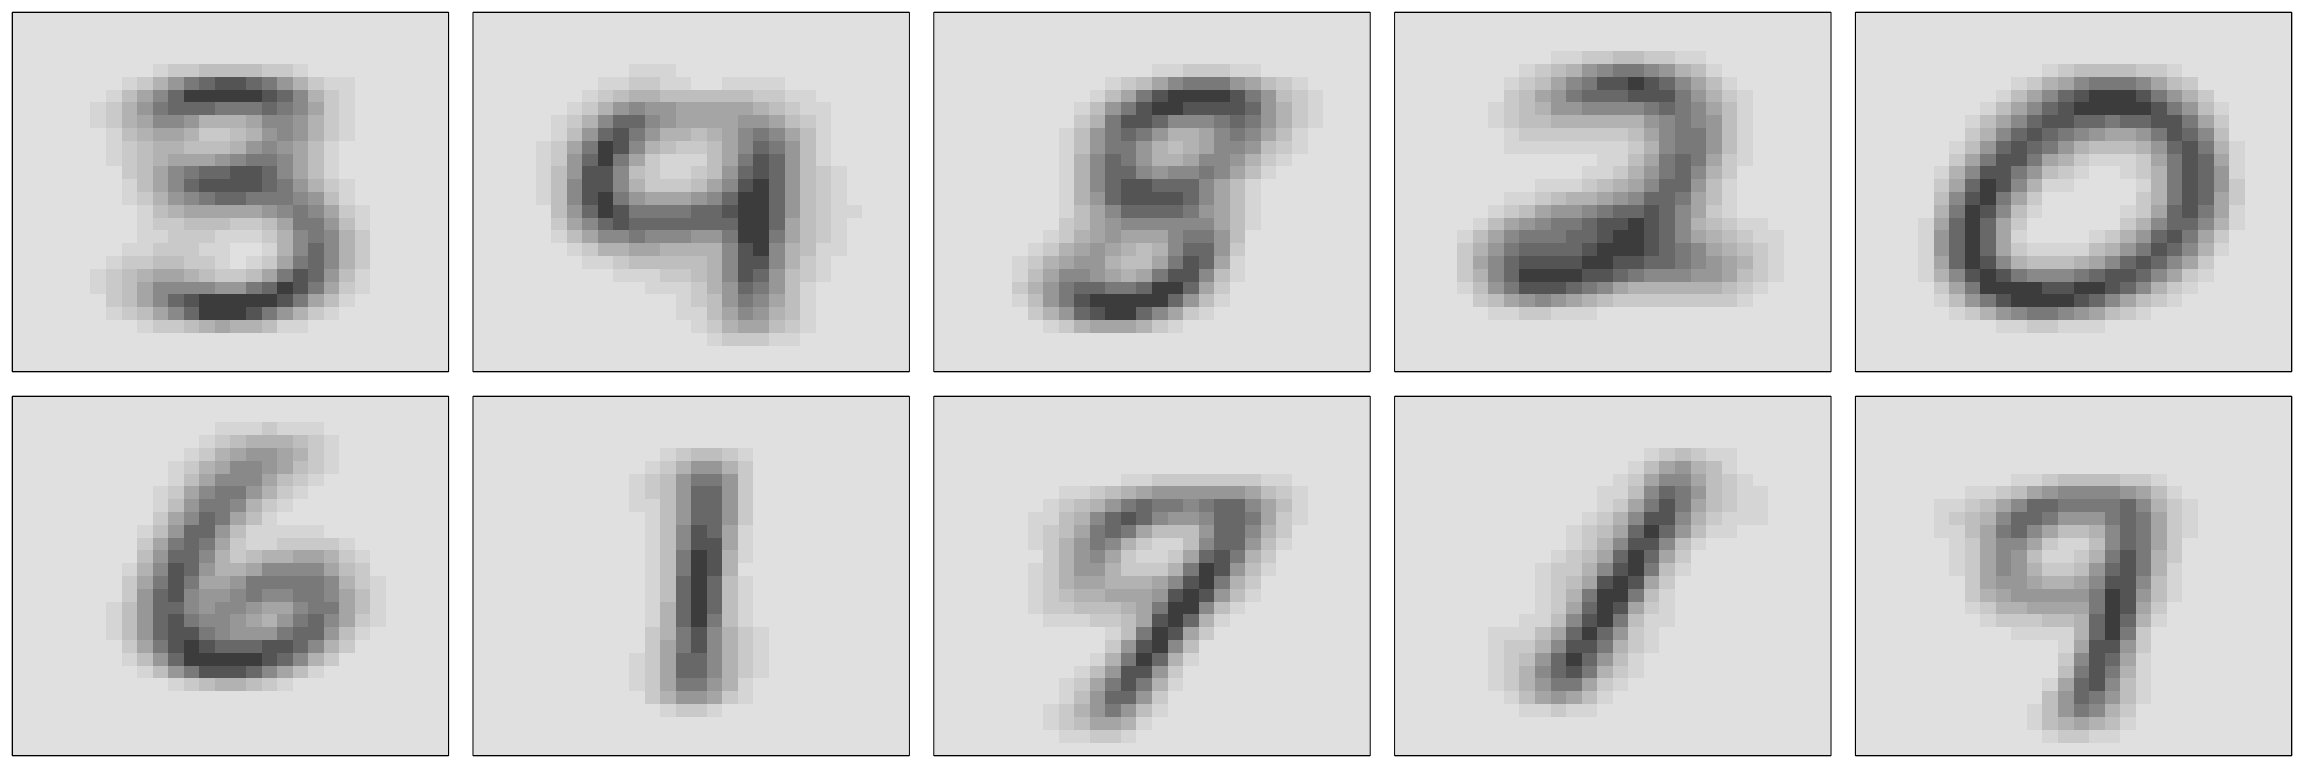 Cluster centers for the 10 clusters identified in the MNIST training data.